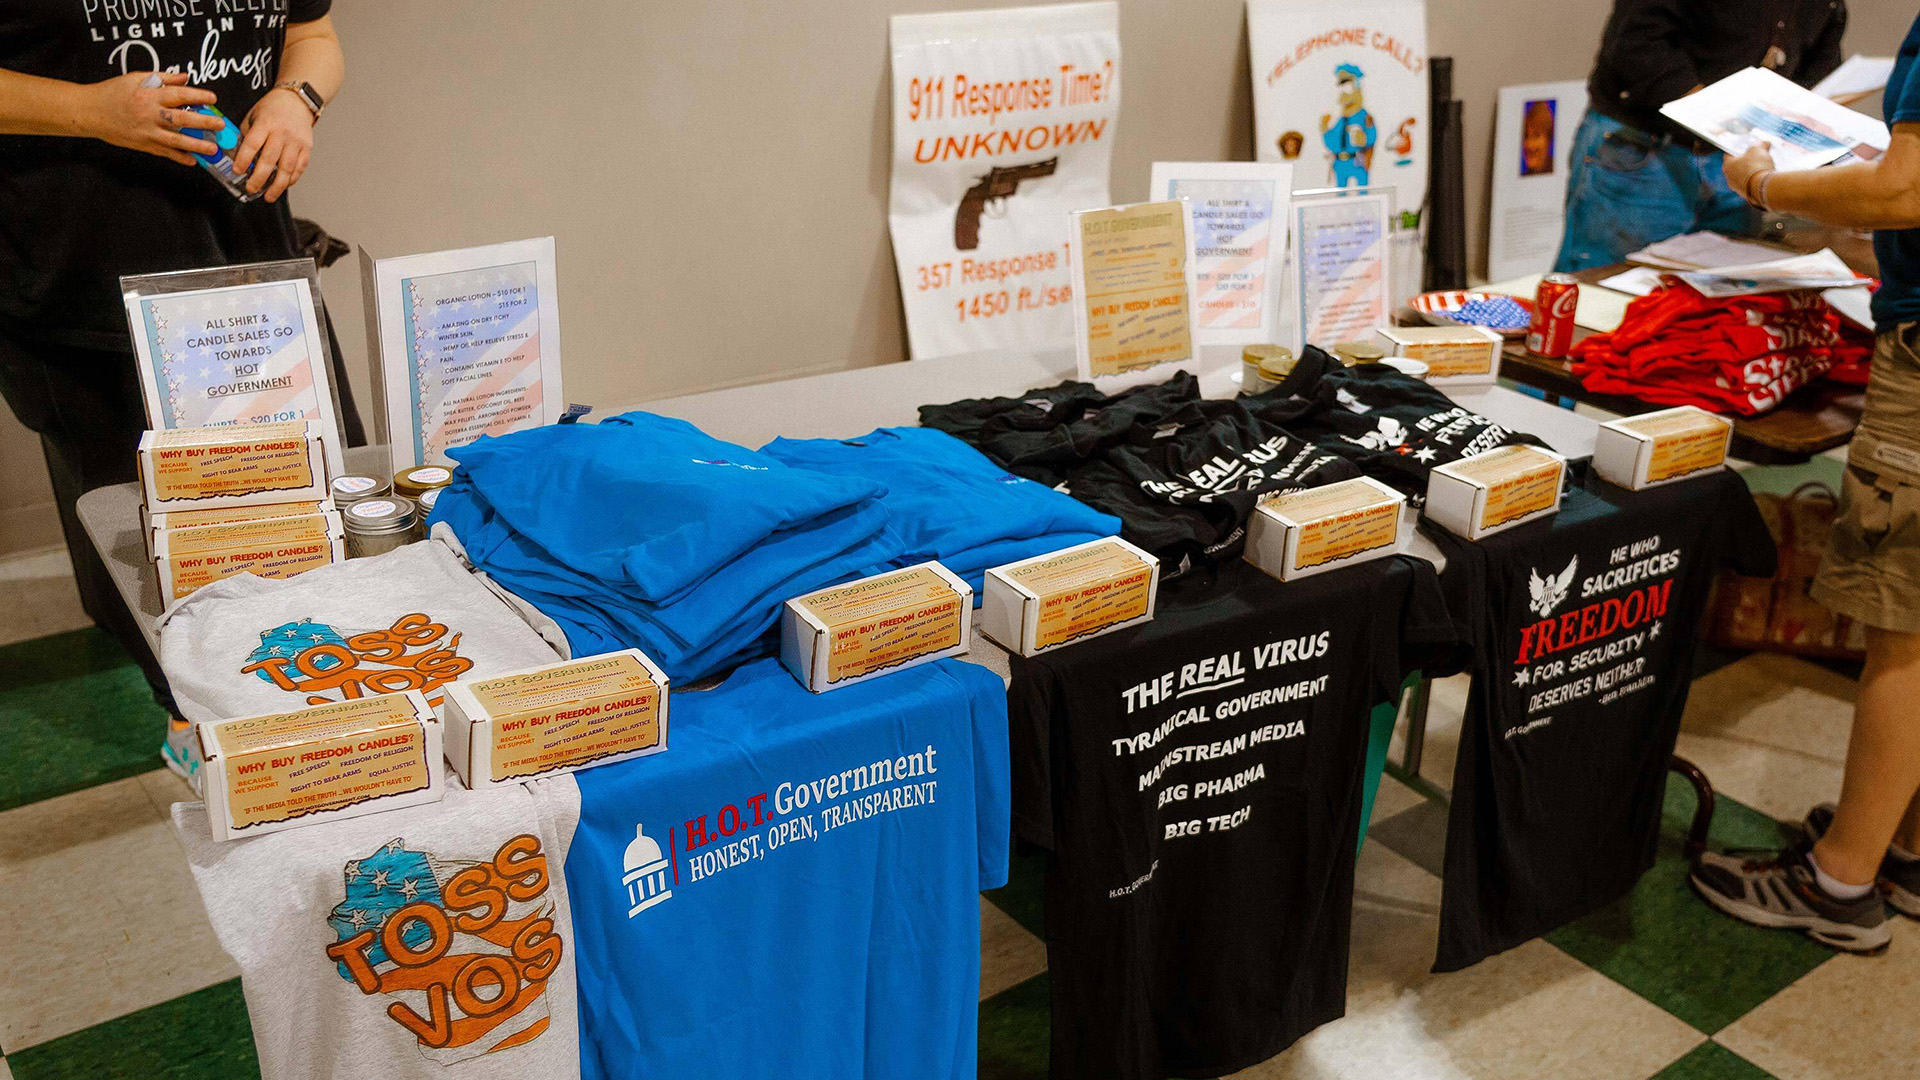 T-shirts stating "Toss Vos," "H.O.T. Government" and other political slogans sit for sale on a table.